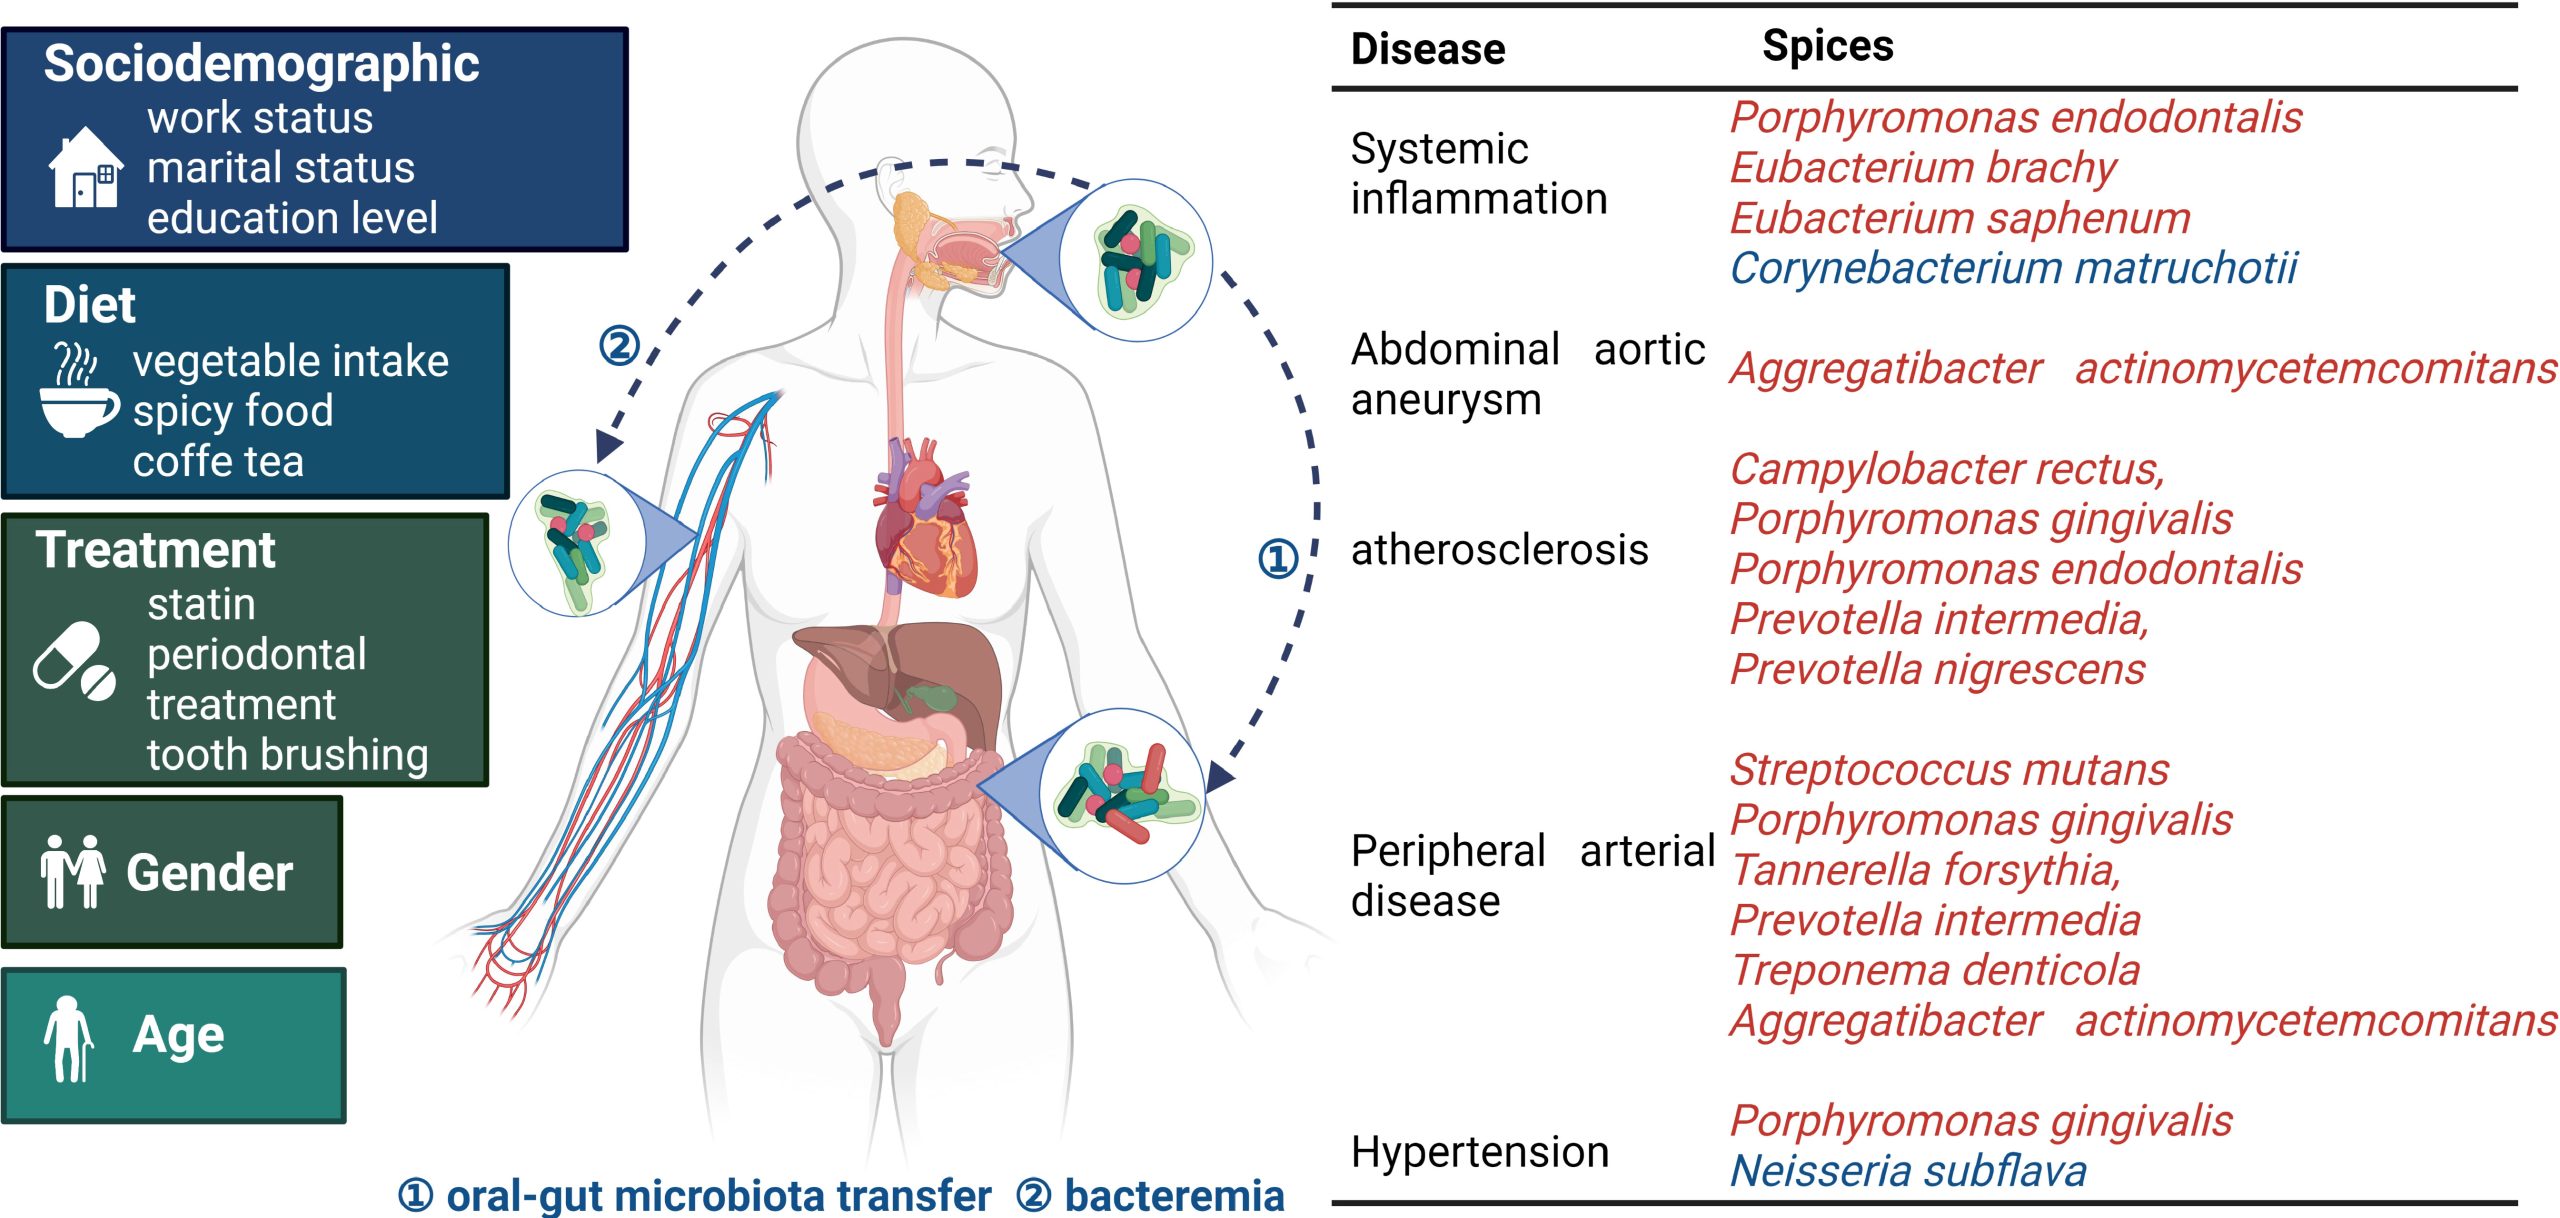 Emerging Trends in Oral Microbiome Research: Implications for Dental Care